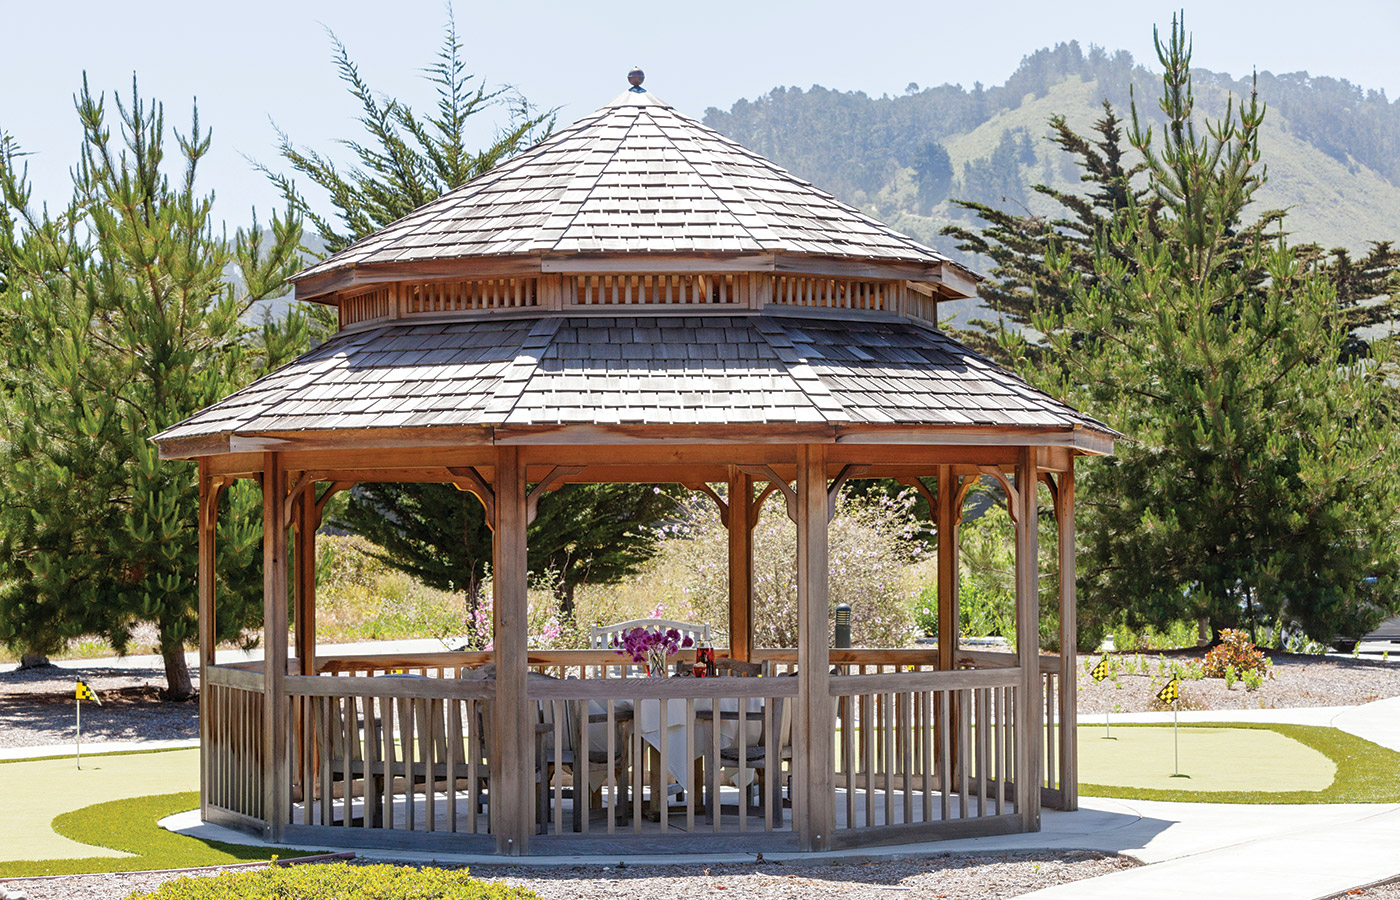 The Gazebo area of the residence